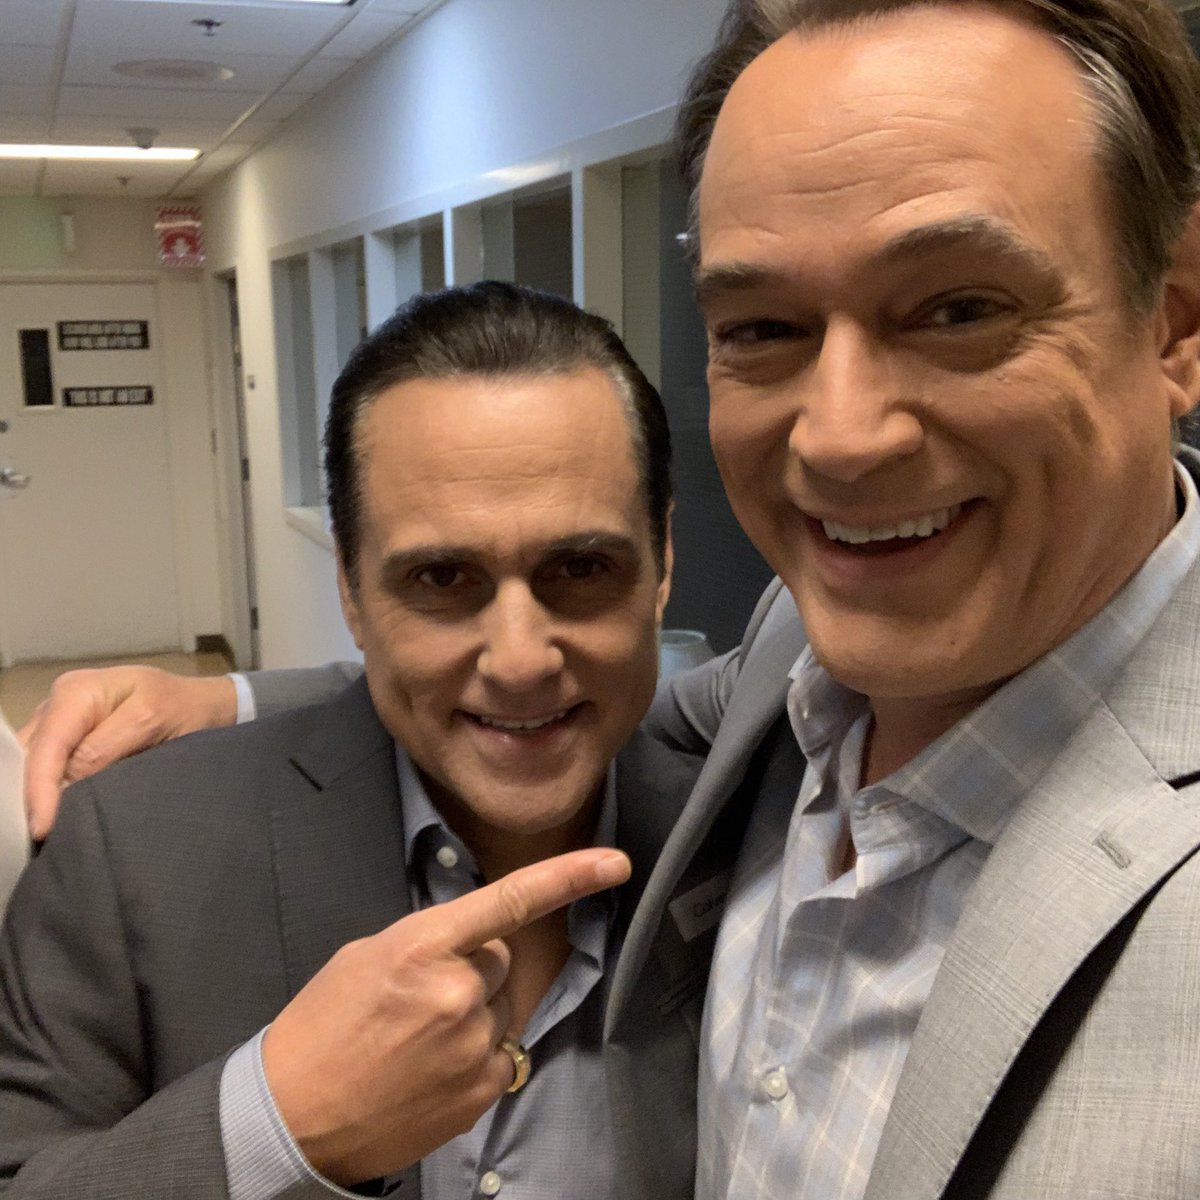 Rivals? Hardly. This dude is the best. @MauriceBenard #emmys #daytimeemmys @GeneralHospital #gh55 #gh #generalhospital #kevinryan #thetwinning #leadactor